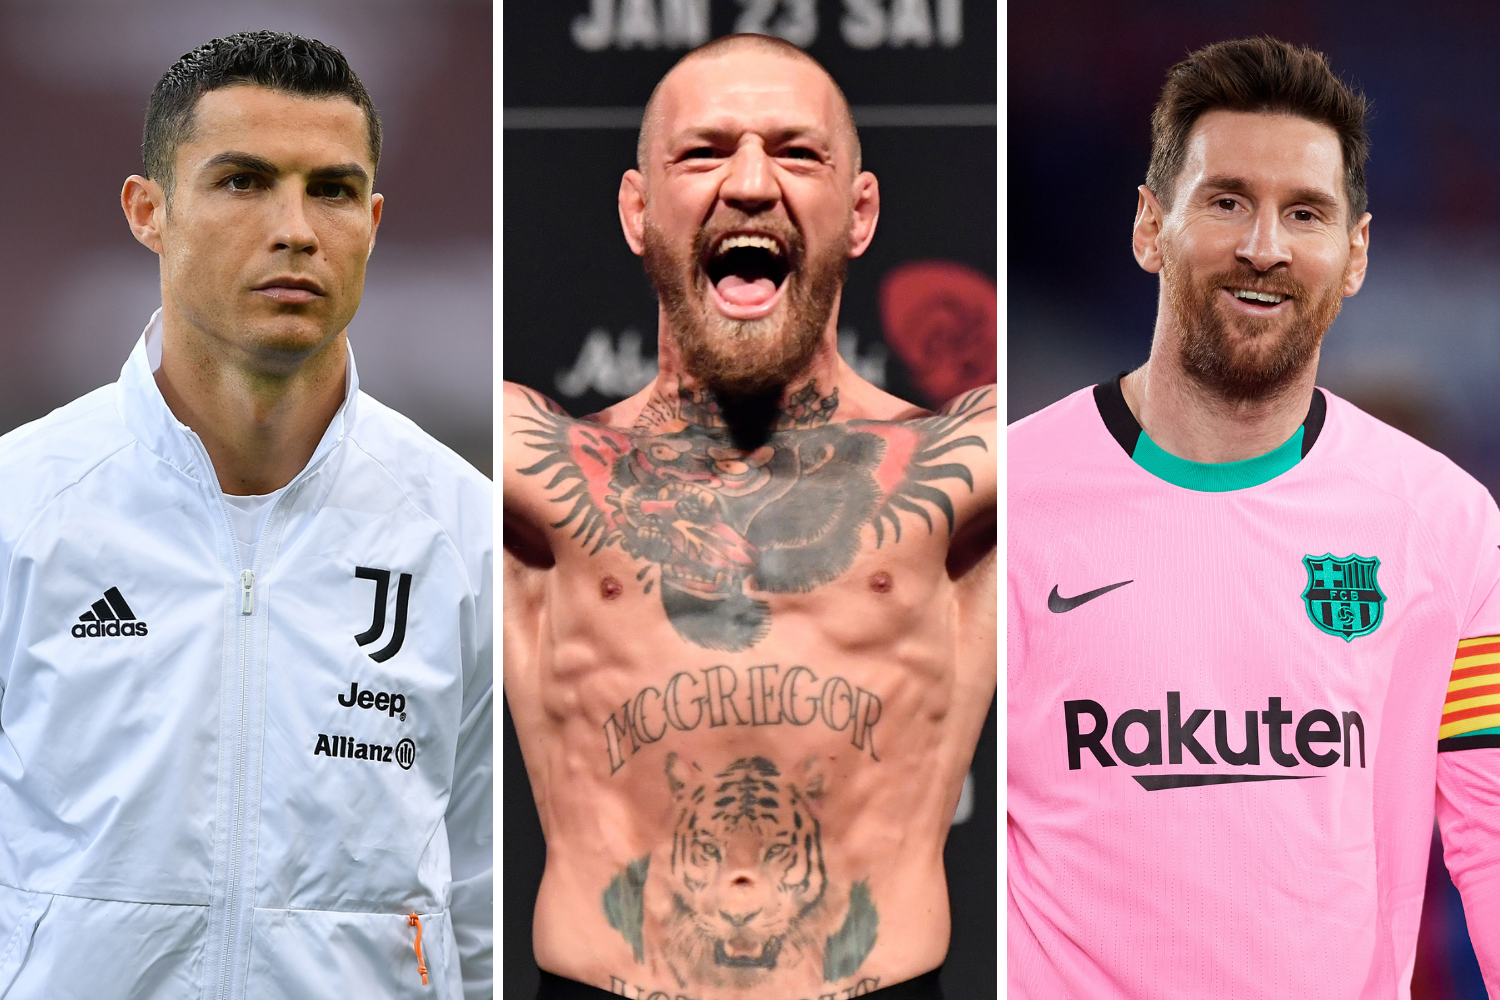 Meet The 10 Highest-Paid Athletes Of 2021 According To Forbes